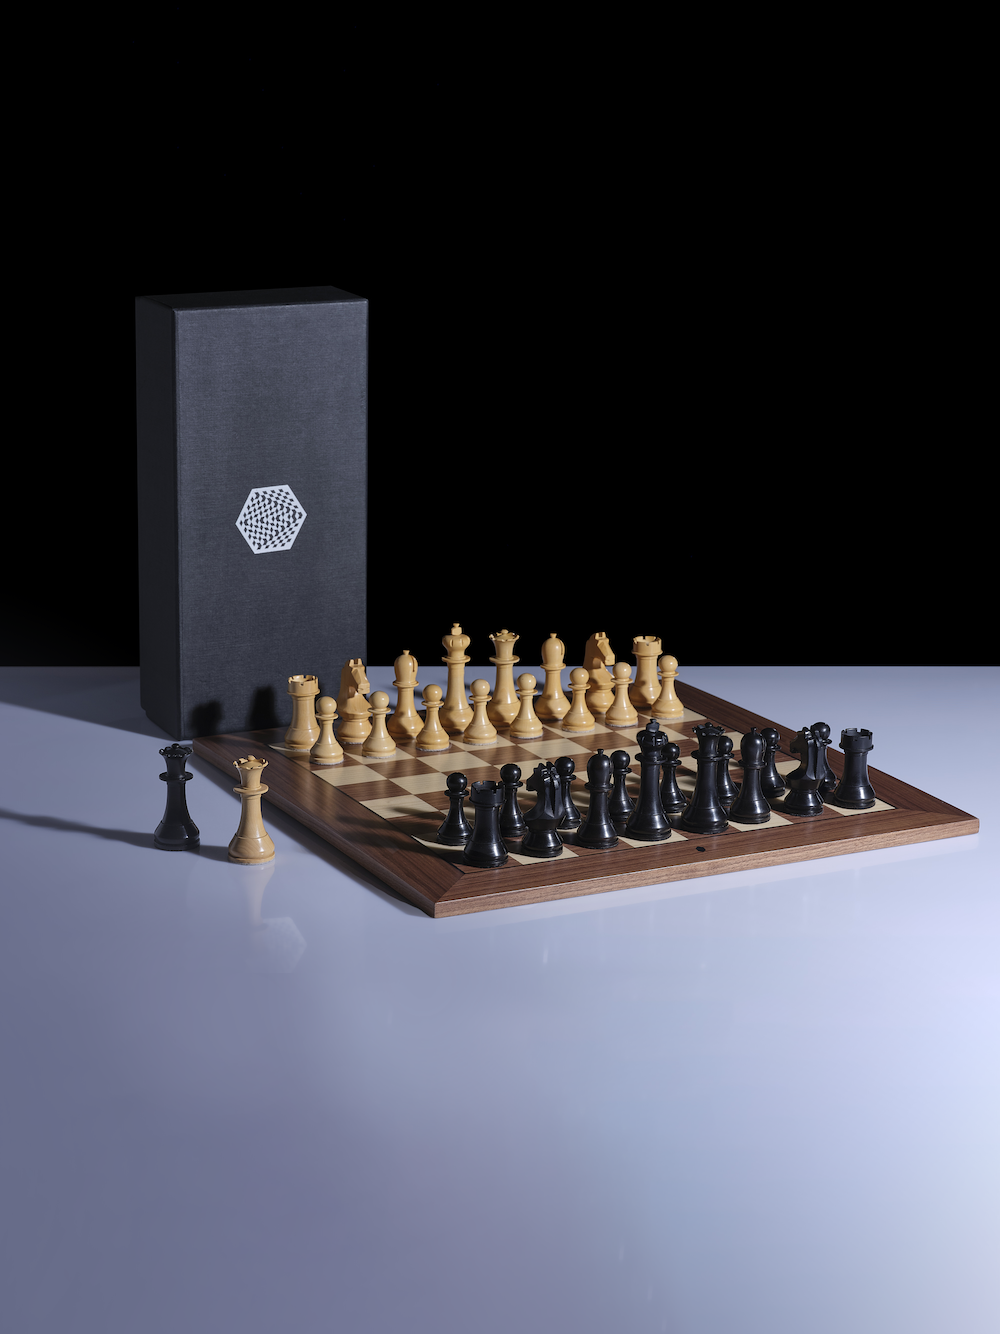 European Chess with walnut board with 50mm coordinates